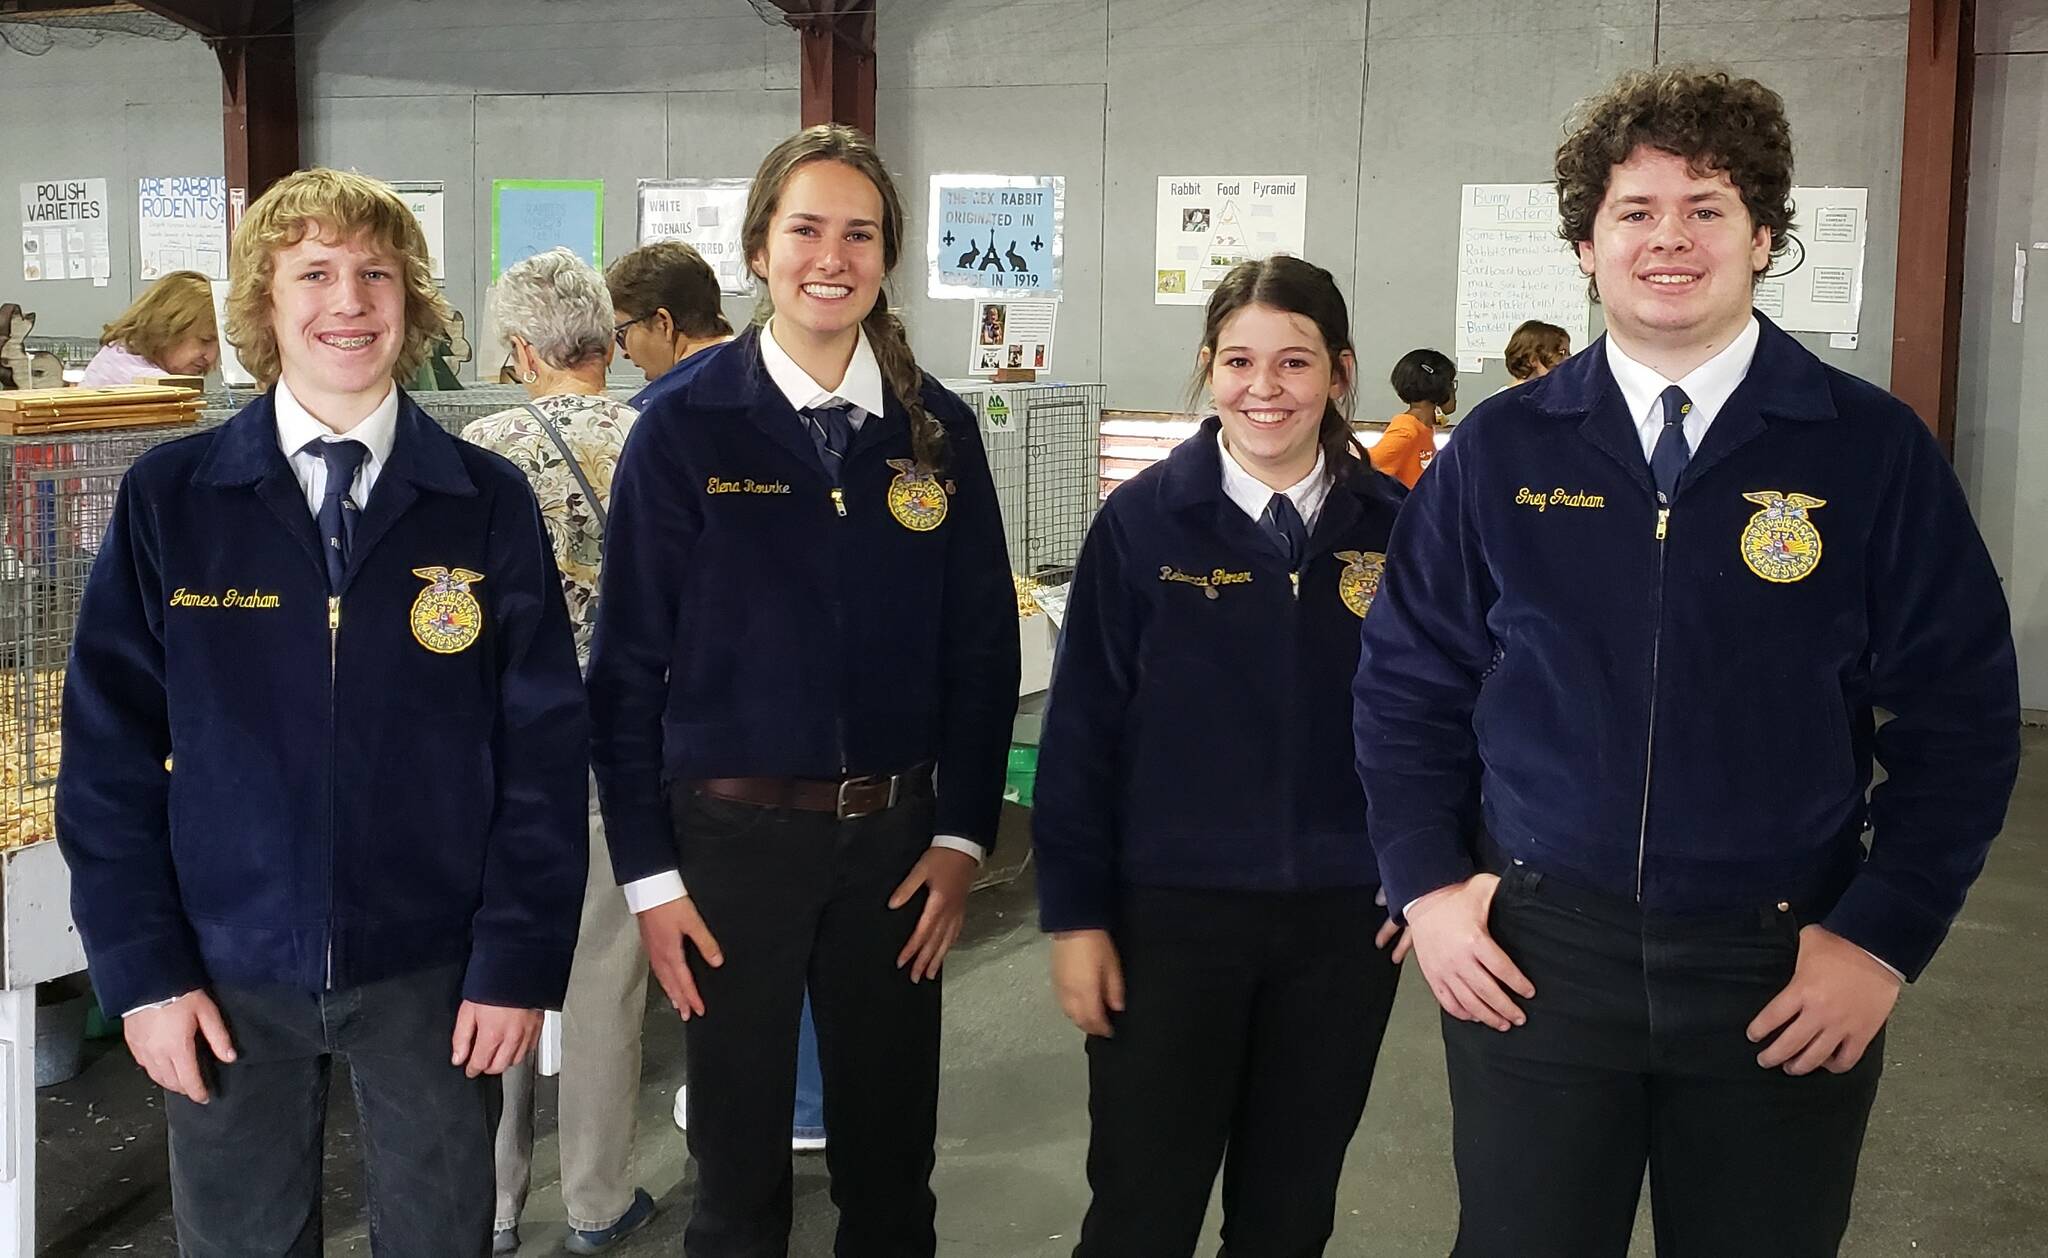 Mount Si Future Farmers of America students, from left James Graham, Elena Rourke, Becca Glover, and Greg Graham. Photo Courtesy of the Snoqualmie Valley School District